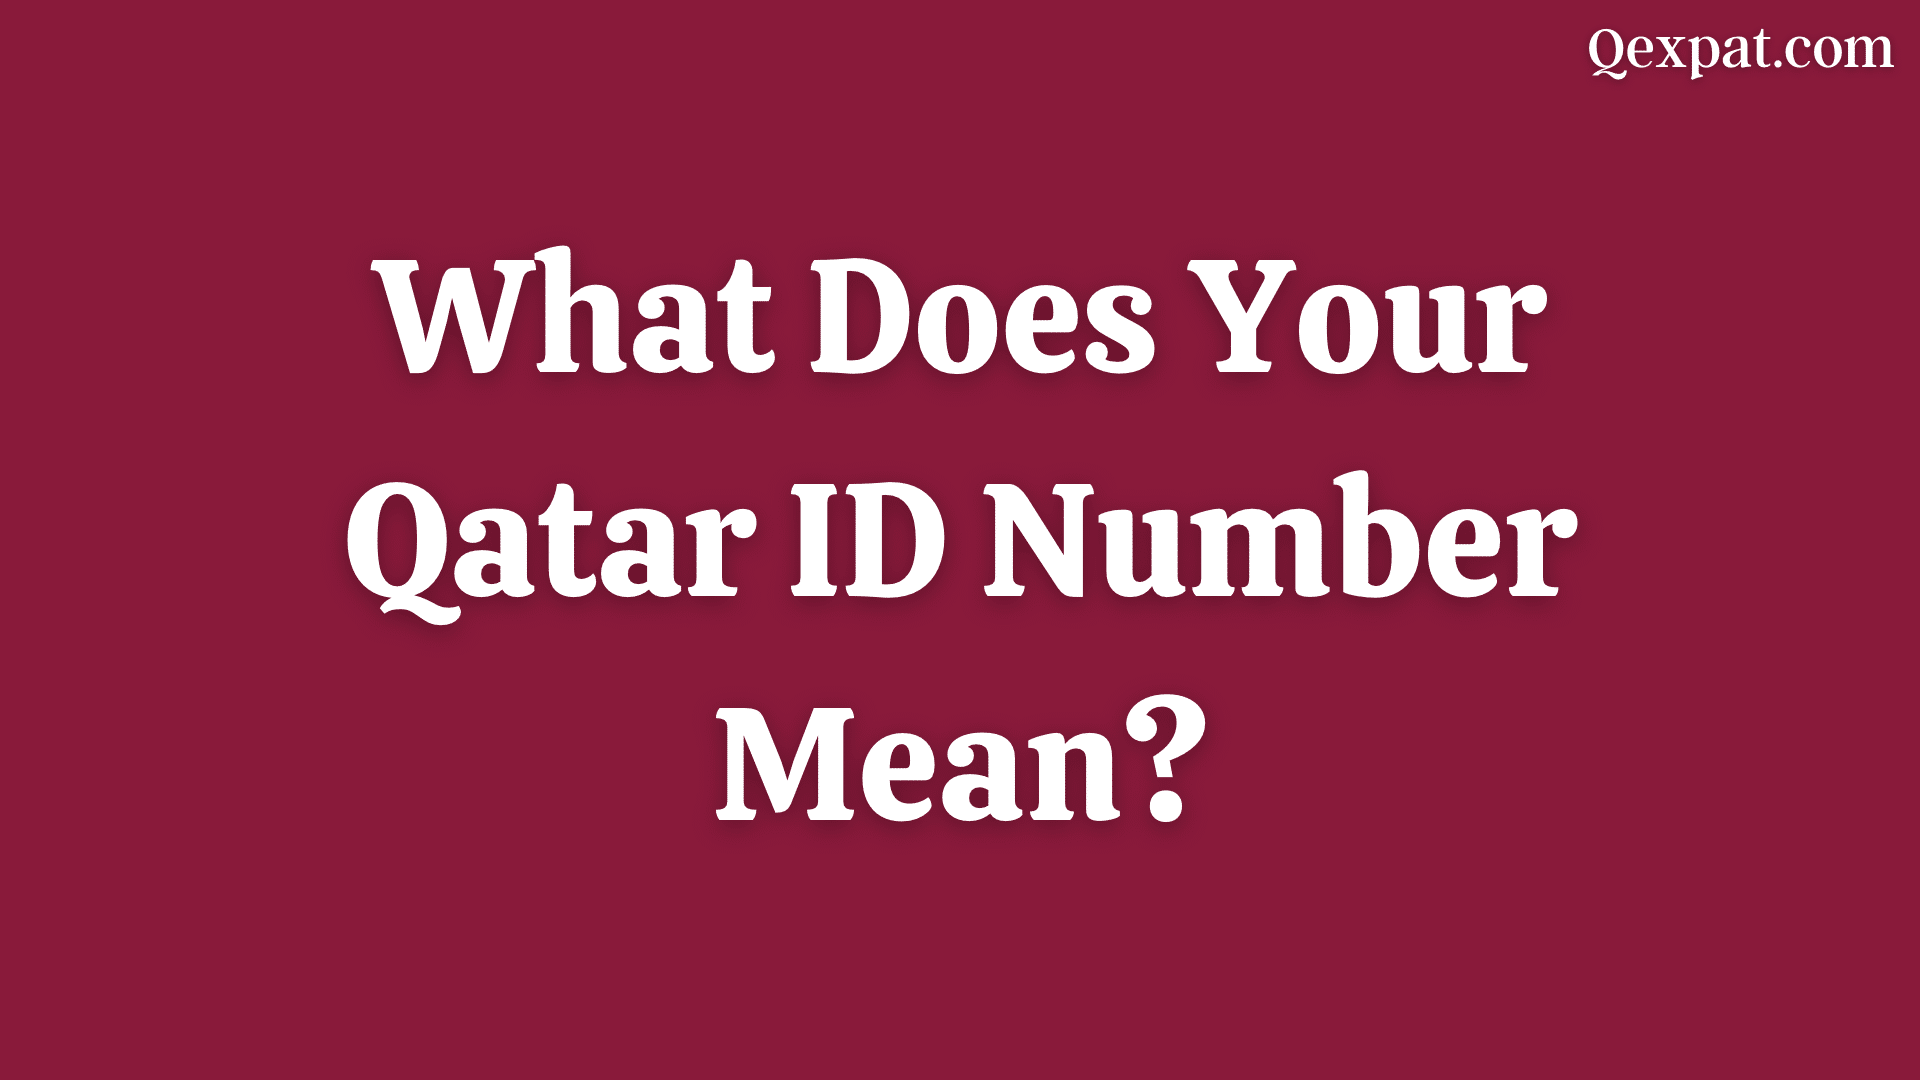 Welcome to our article on the meaning and significance of the Qatar ID Number (QID). In Qatar, the QID is a unique 11-digit number that holds great importance for residents. Have you ever wondered what these numbers actually represent? In this article, we will break down the structure of the QID and explain what each digit signifies. By understanding the meaning behind your QID, you'll gain valuable insights into its role in your daily life. So, let's dive in and uncover the mysteries of your Qatar ID Number!